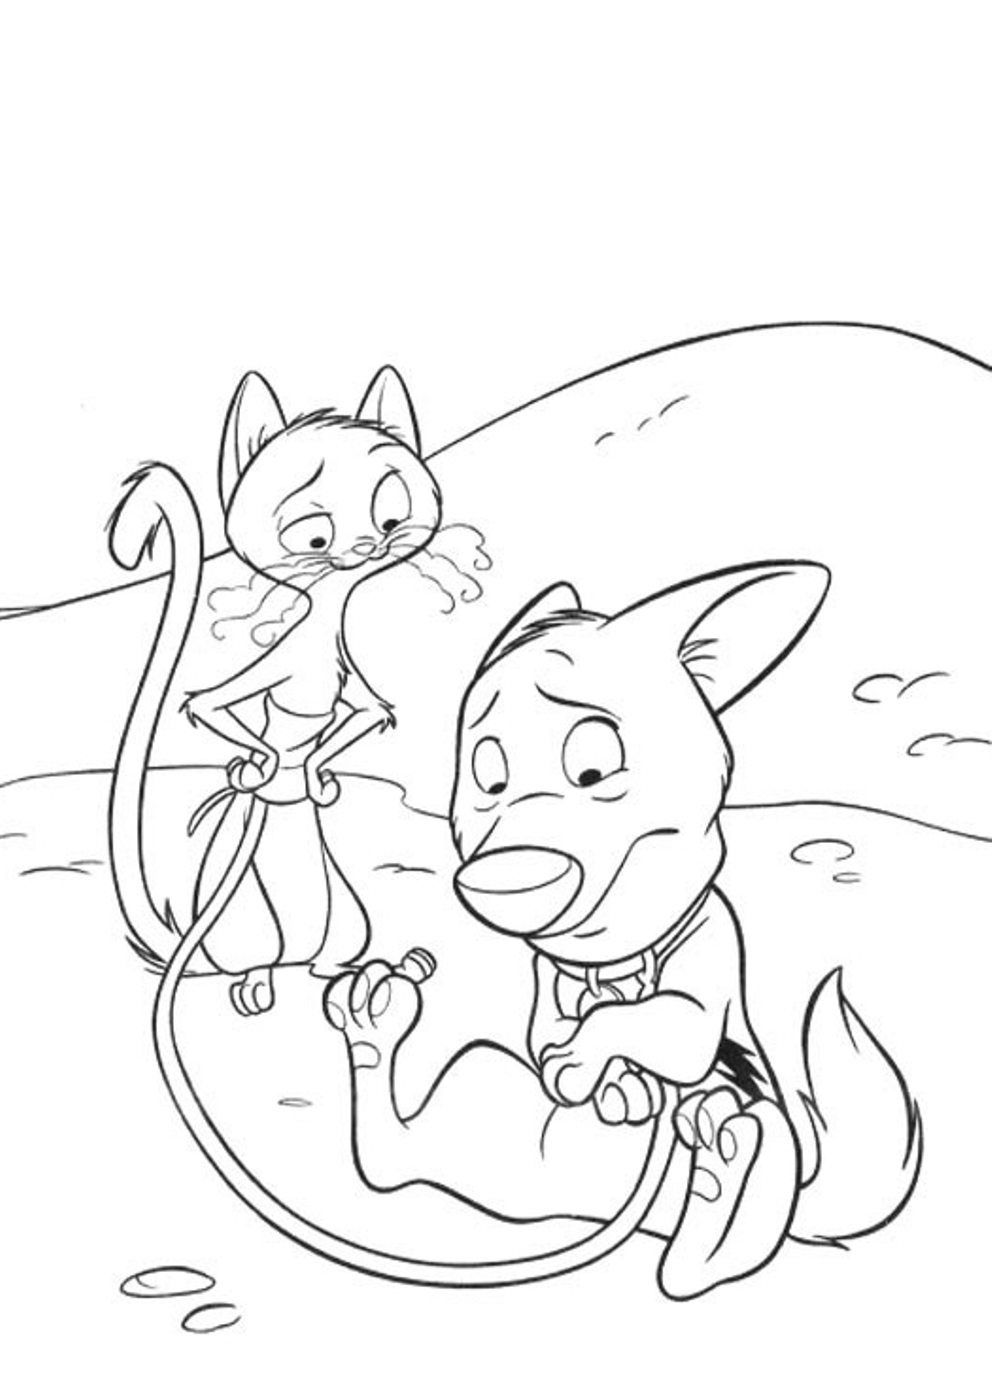 Disney Bolt Coloring Pages at GetColorings.com | Free printable